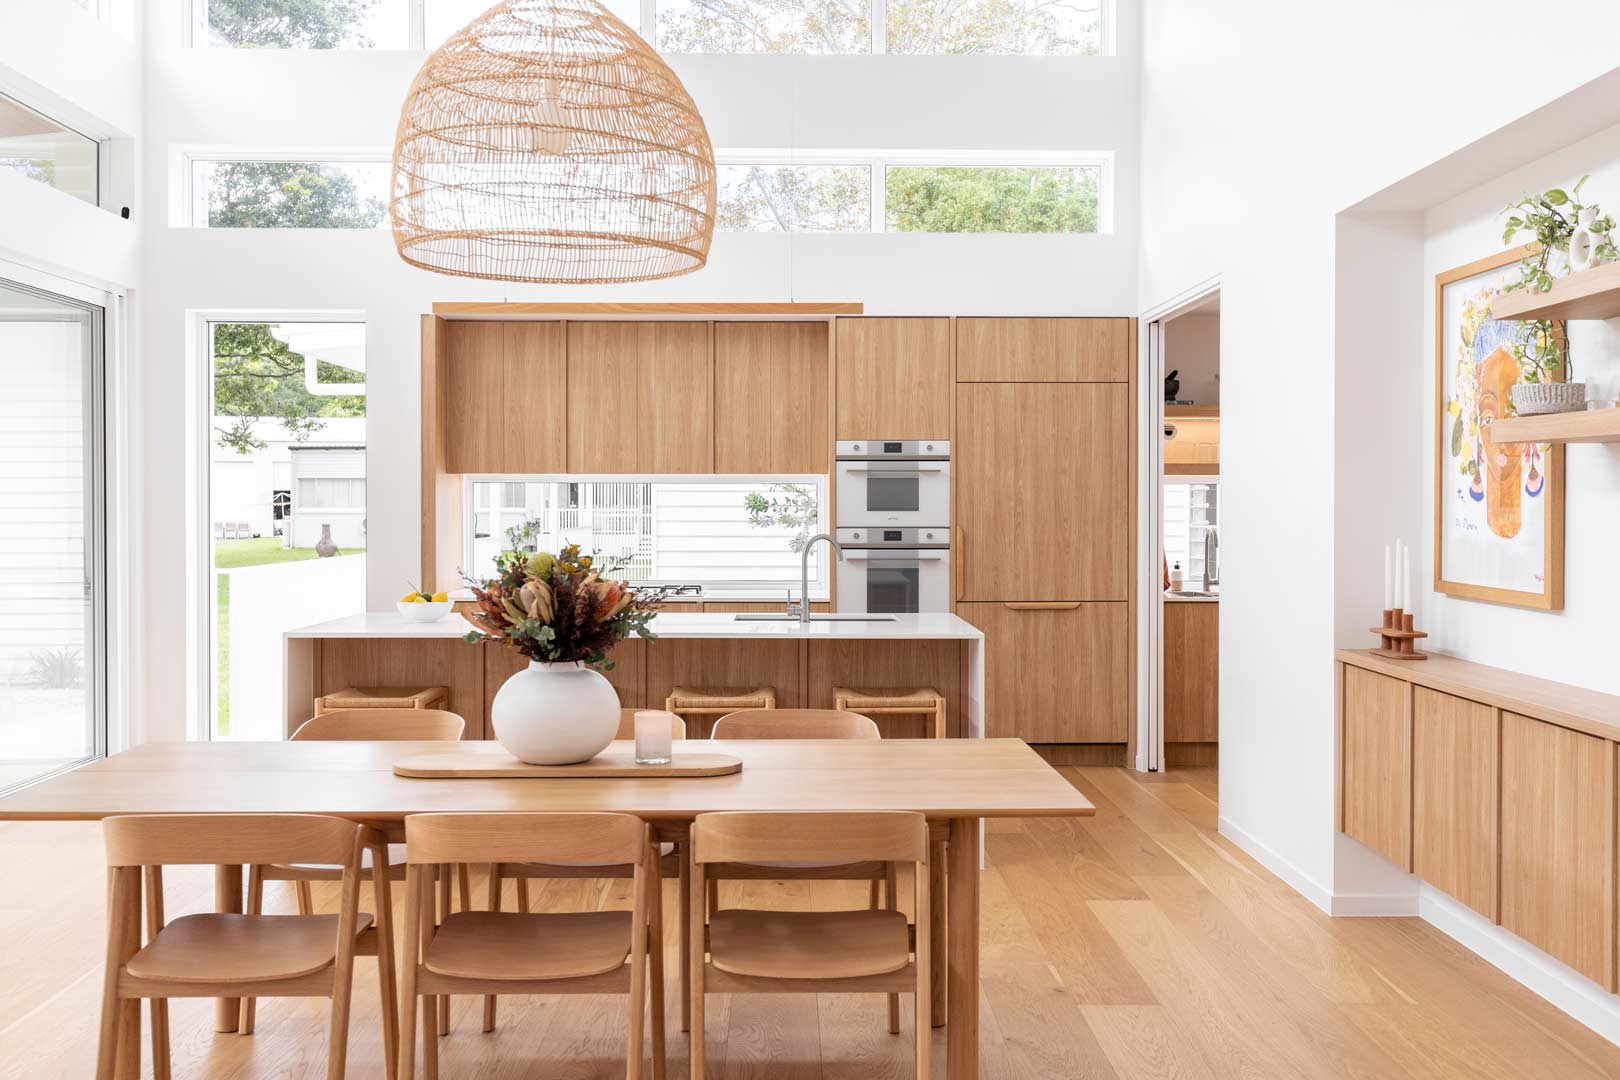 A bright home renovation for a family with the kitchen opening to the dining room and the living room